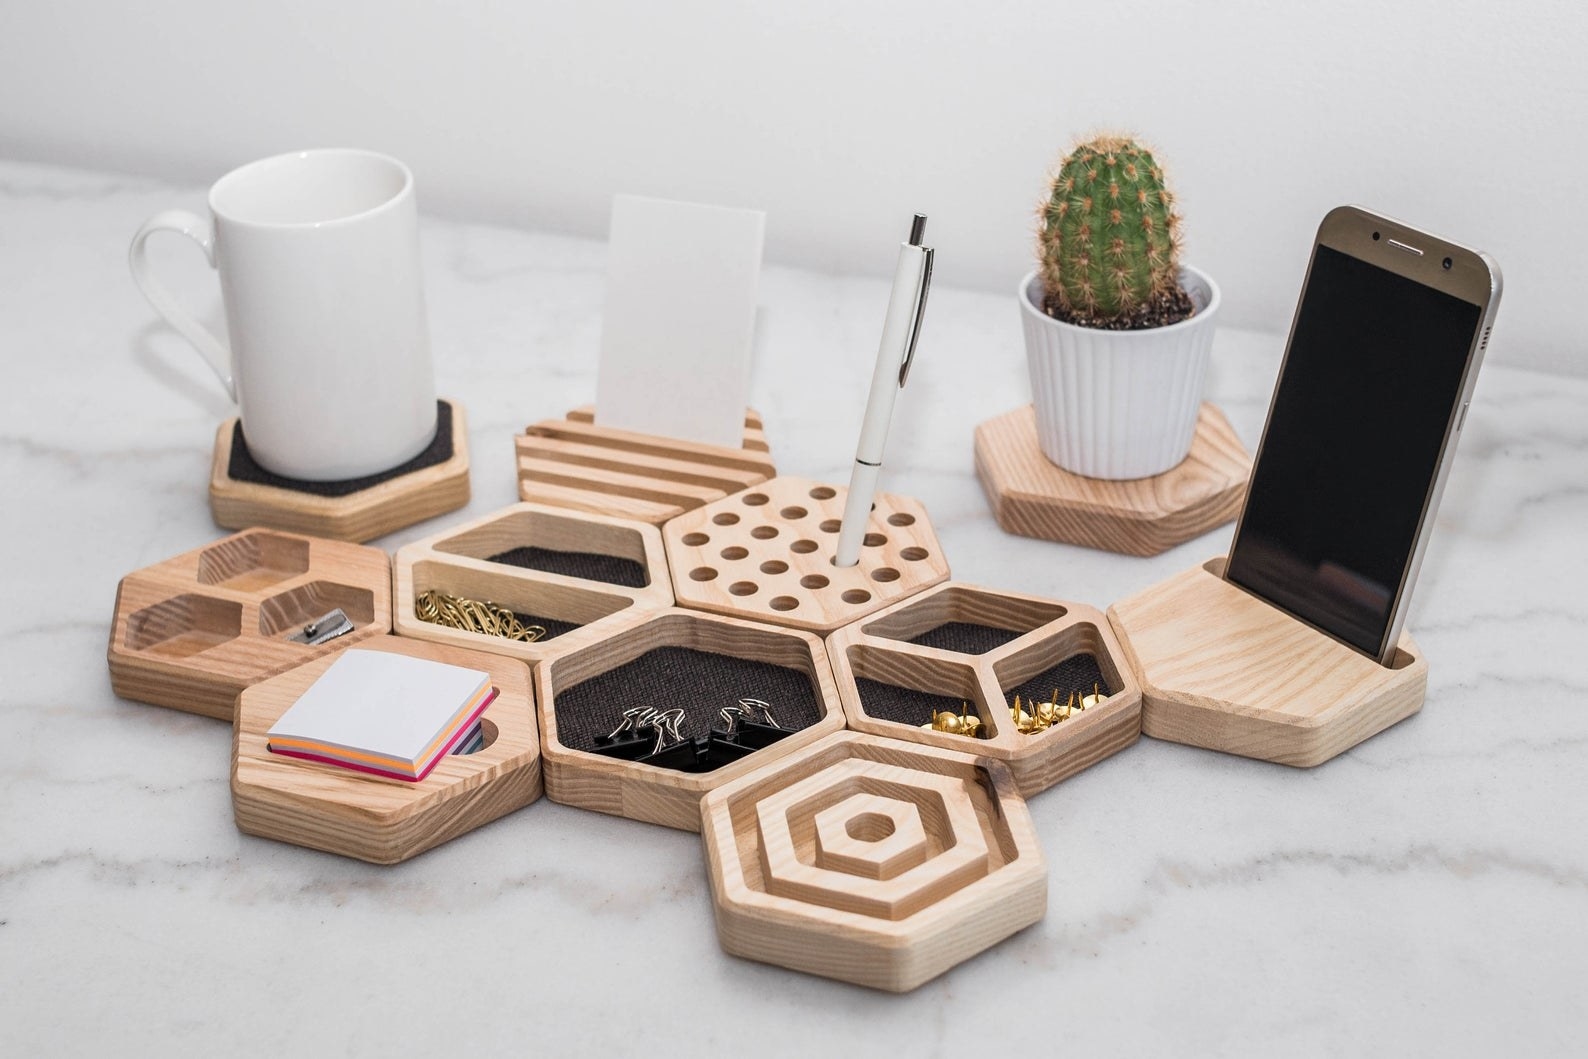 many hexagonal desk organizers holding office supplies, a phone, and pens